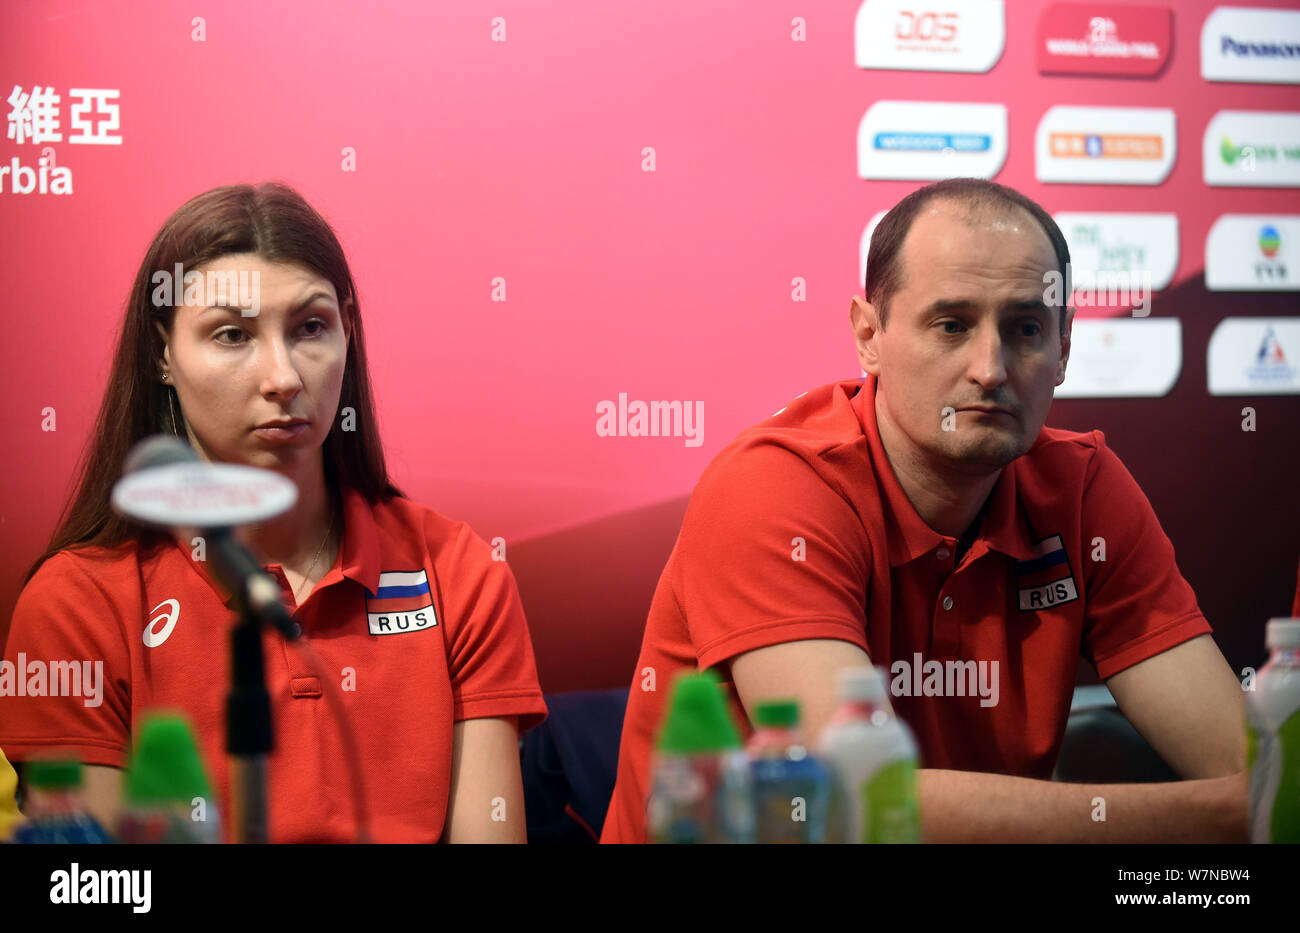 Irina Zaryazhko, left, and coach Kuziutkin Vladimir of Russia attend a press conference for the Pool G1-Group 1 match during the FIVB Volleyball World Stock Photo